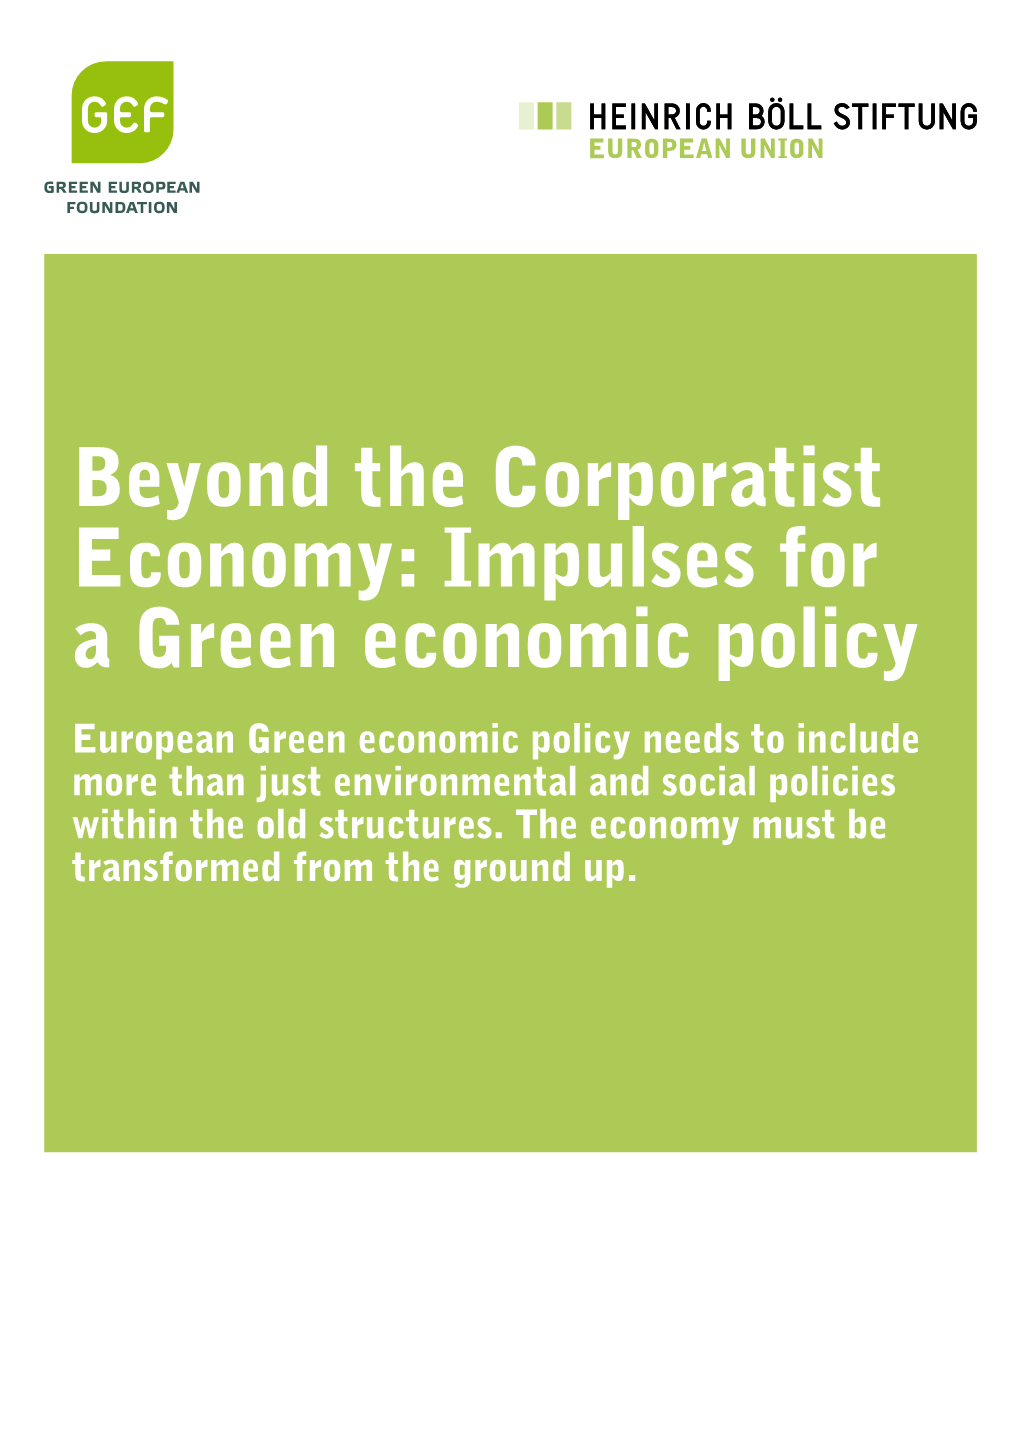 Beyond the Corporatist Economy: Impulses for a Green Economic Policy